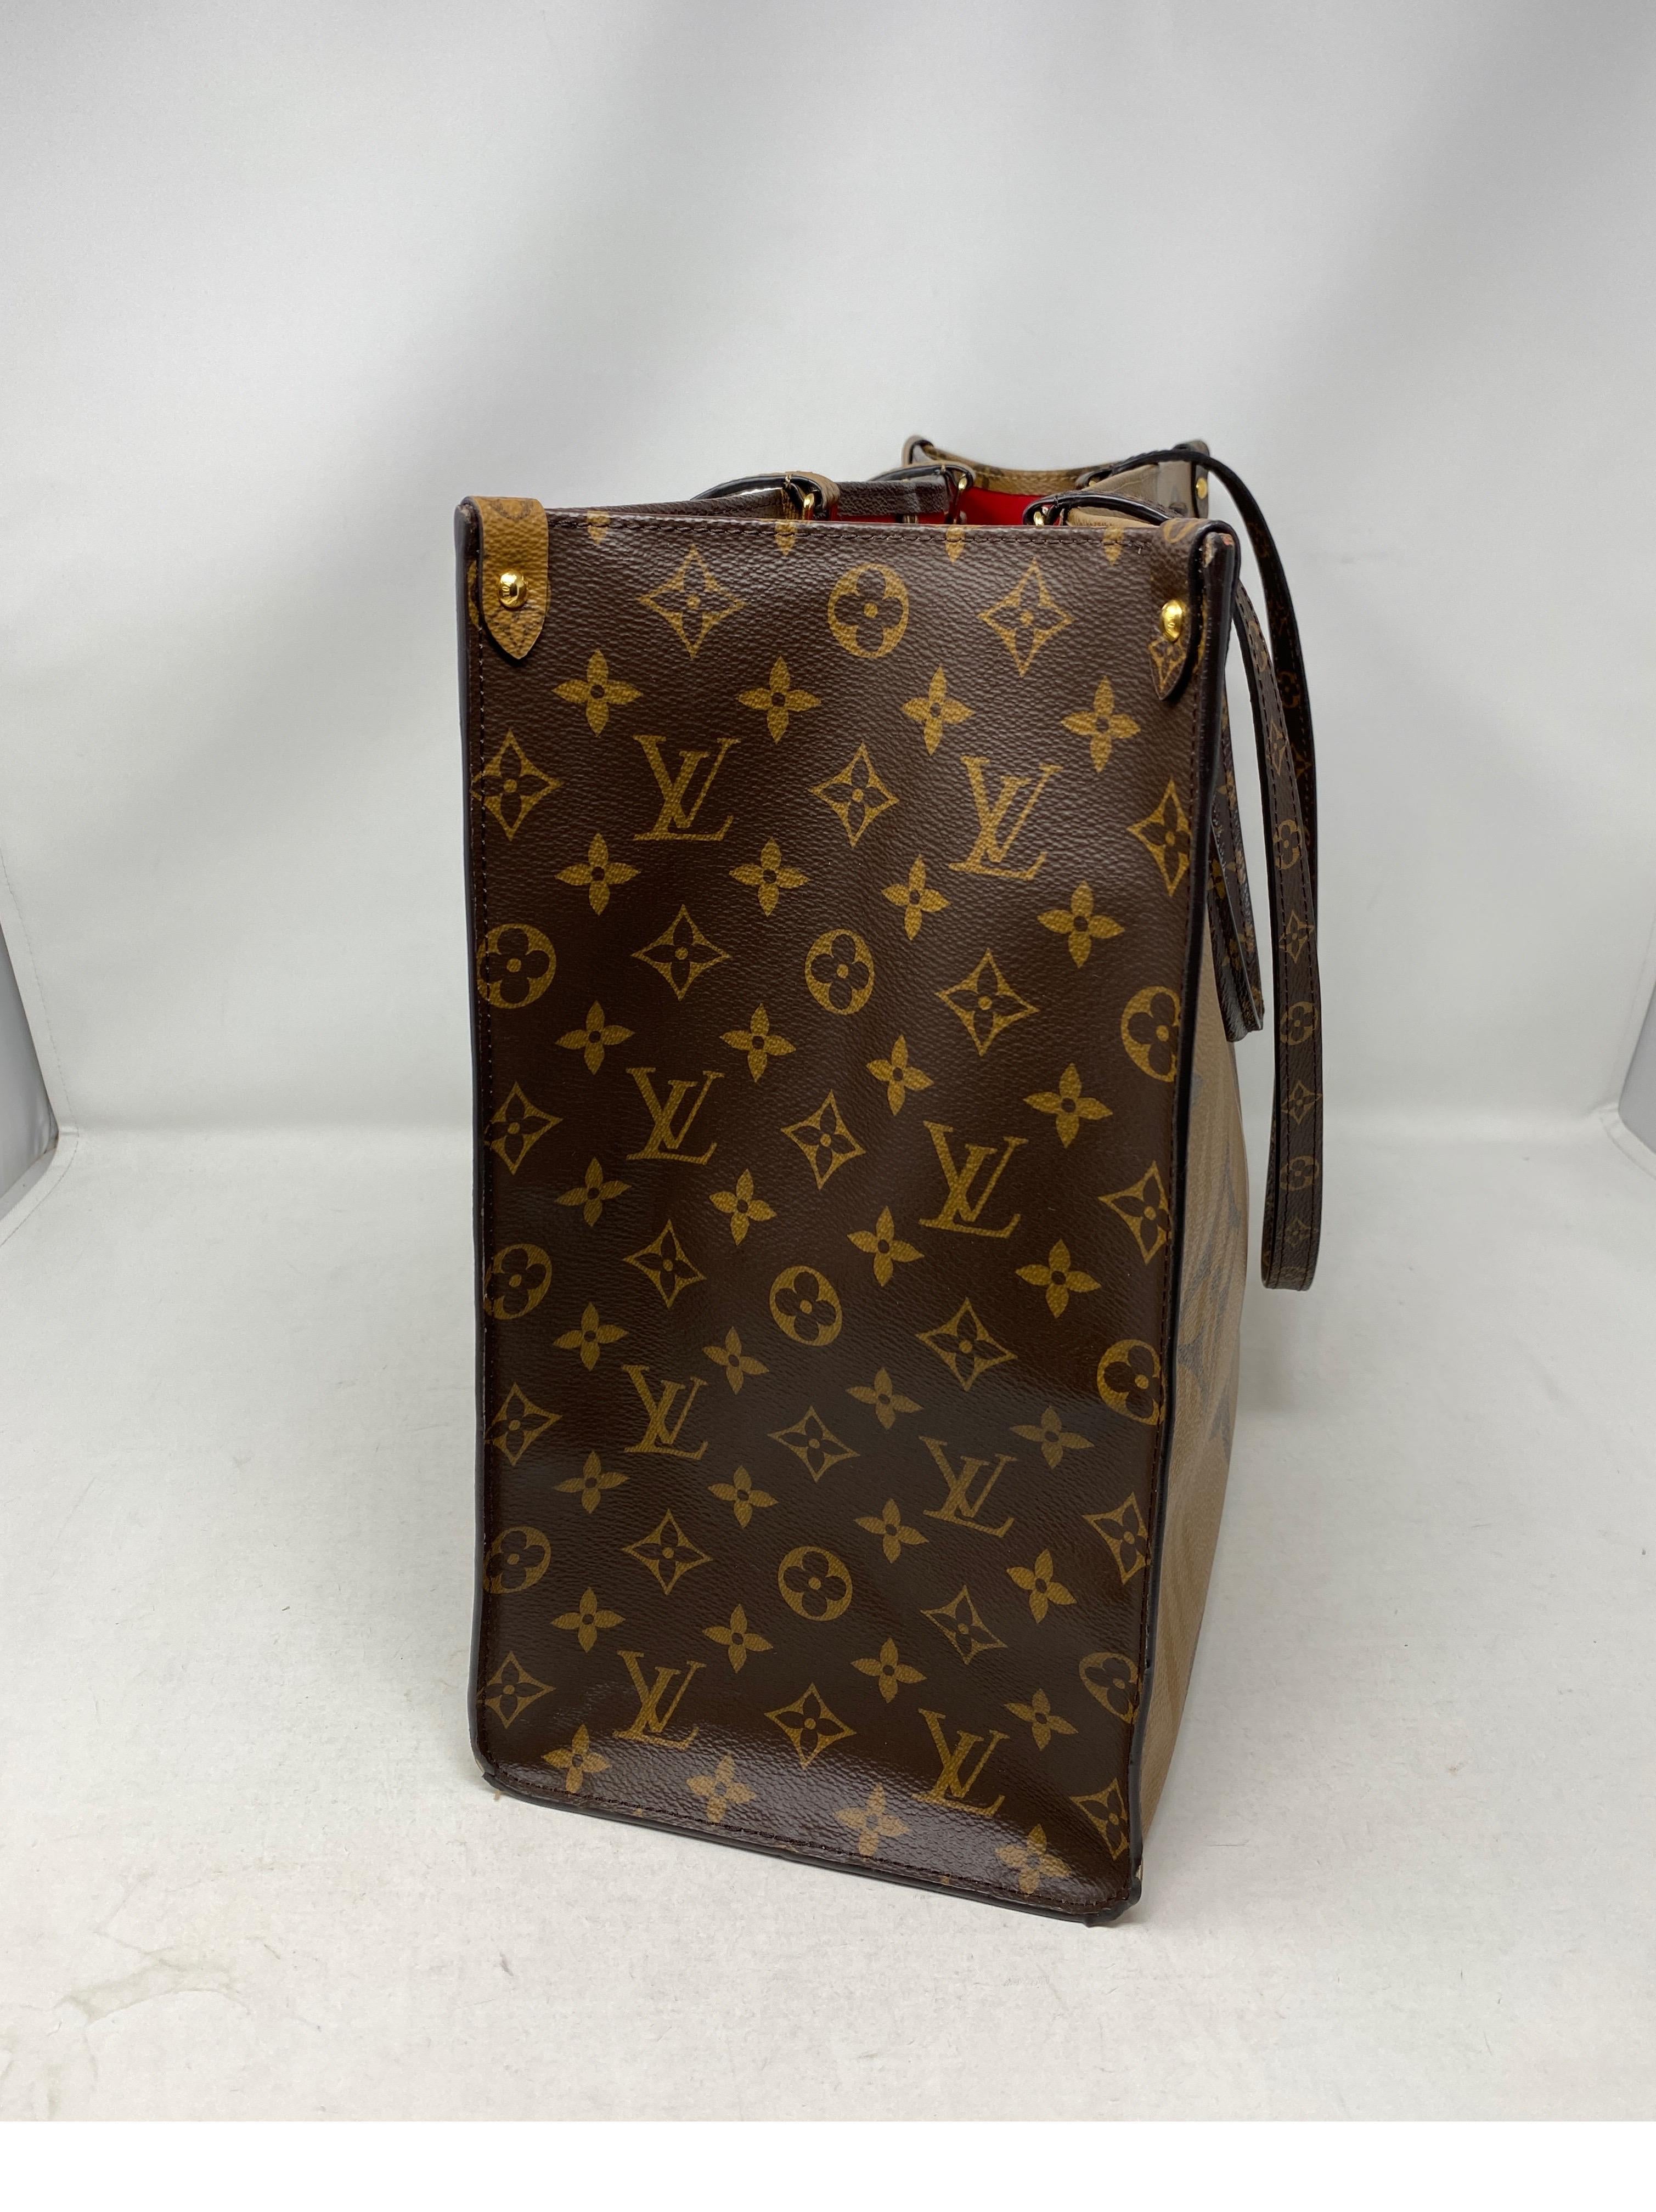 Louis Vuitton Reverse On The Go Bag. Rare and limited collection. MM size. Good condition. Hard to find bag. Limited and rare. Guaranteed authentic. 